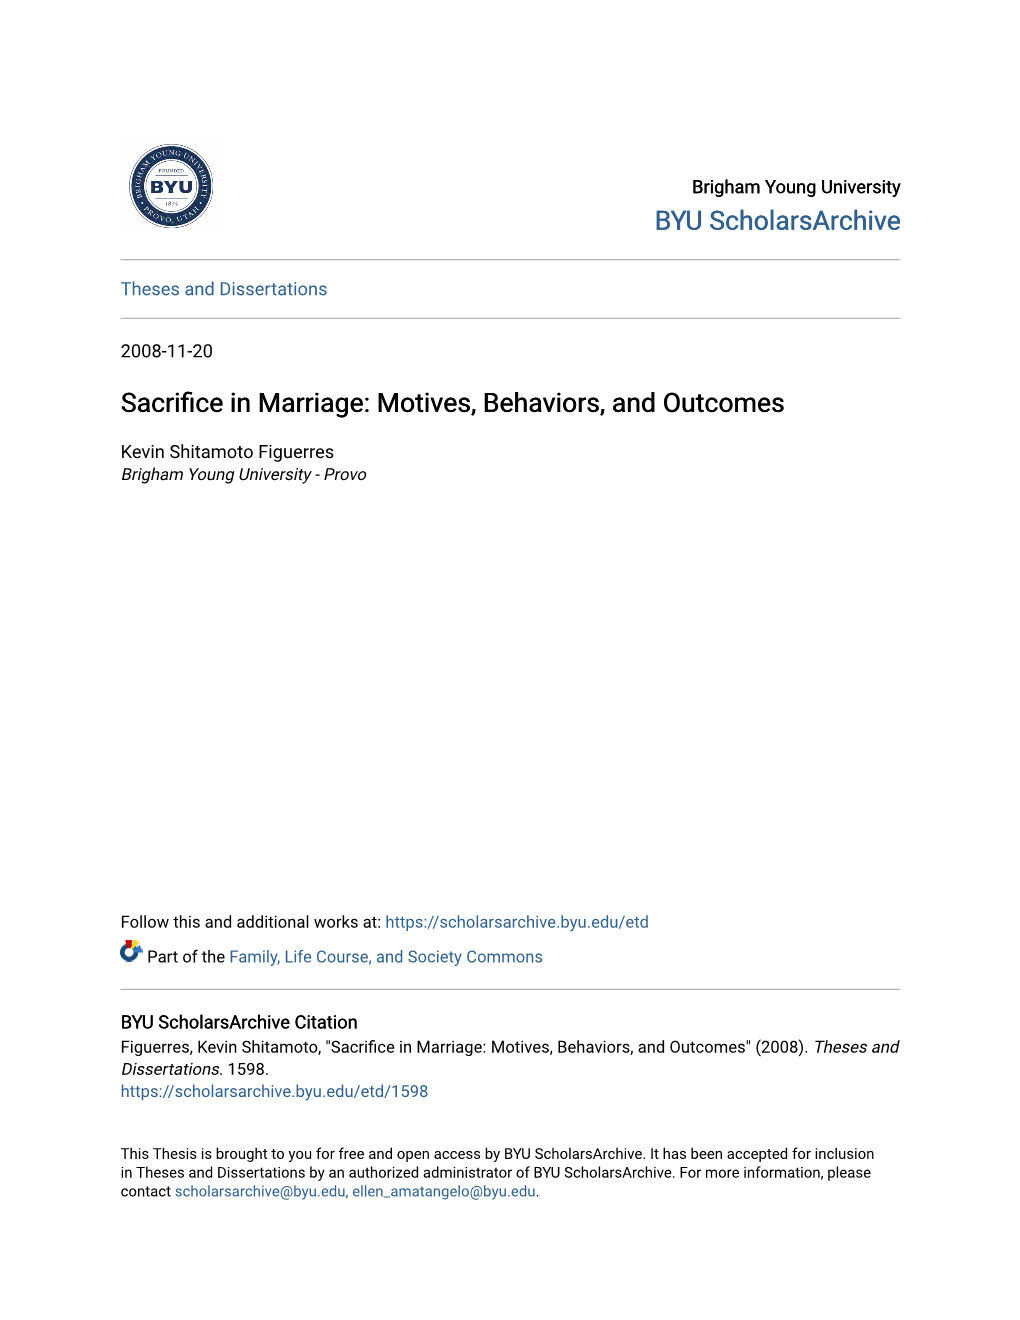 Sacrifice in Marriage: Motives, Behaviors, and Outcomes